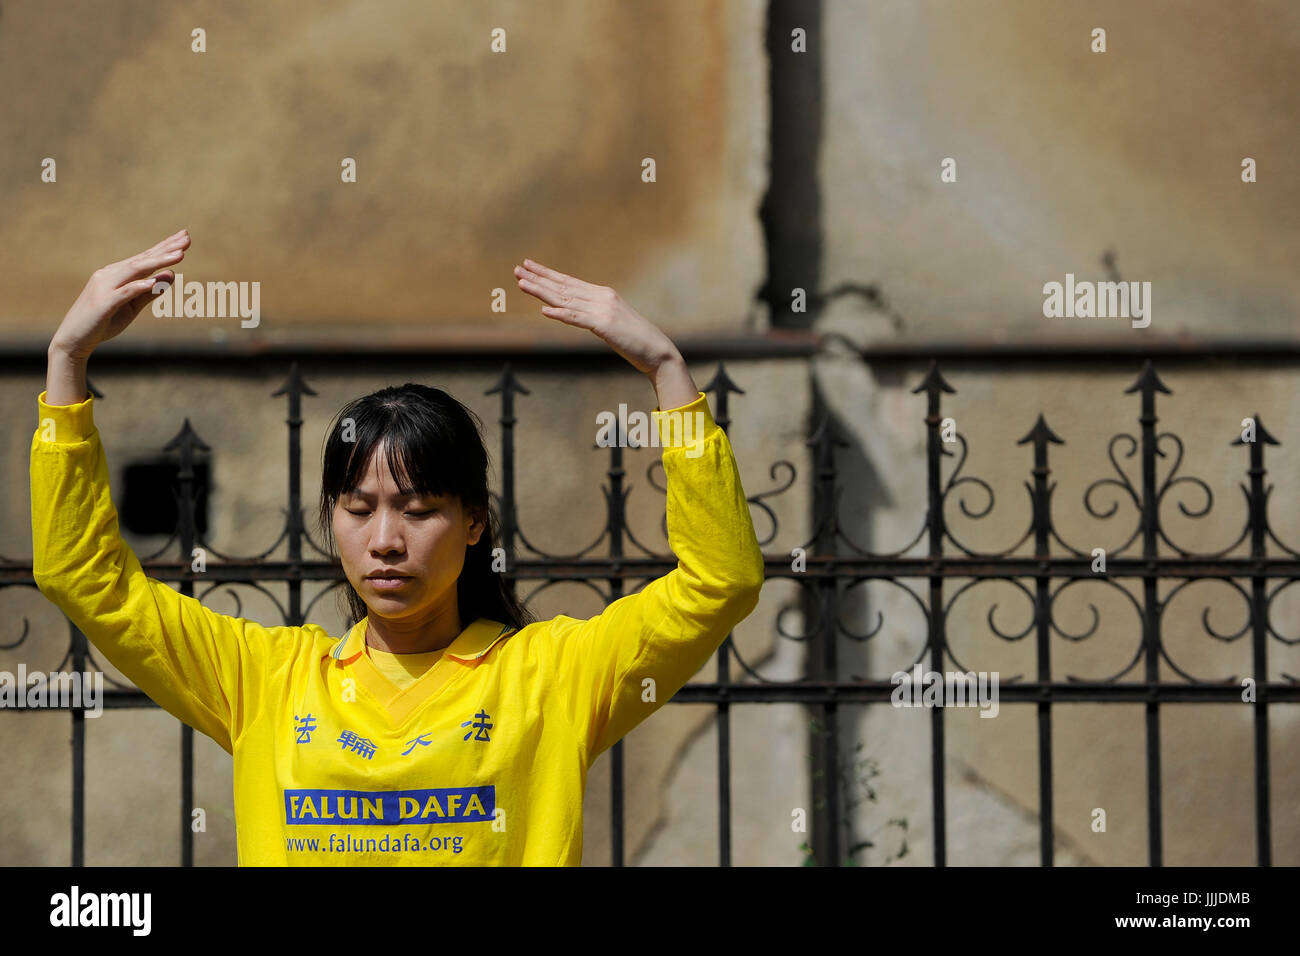 Prague, Czech Republic. 20th July, 2017. Falun Gong practitioner commemorates the 18th anniversary of their persecution in China in front of the Chinese Embassy building in Prague, Czech Republic, on July 20, 2017. Credit: Ondrej Deml/CTK Photo/Alamy Live News Stock Photo